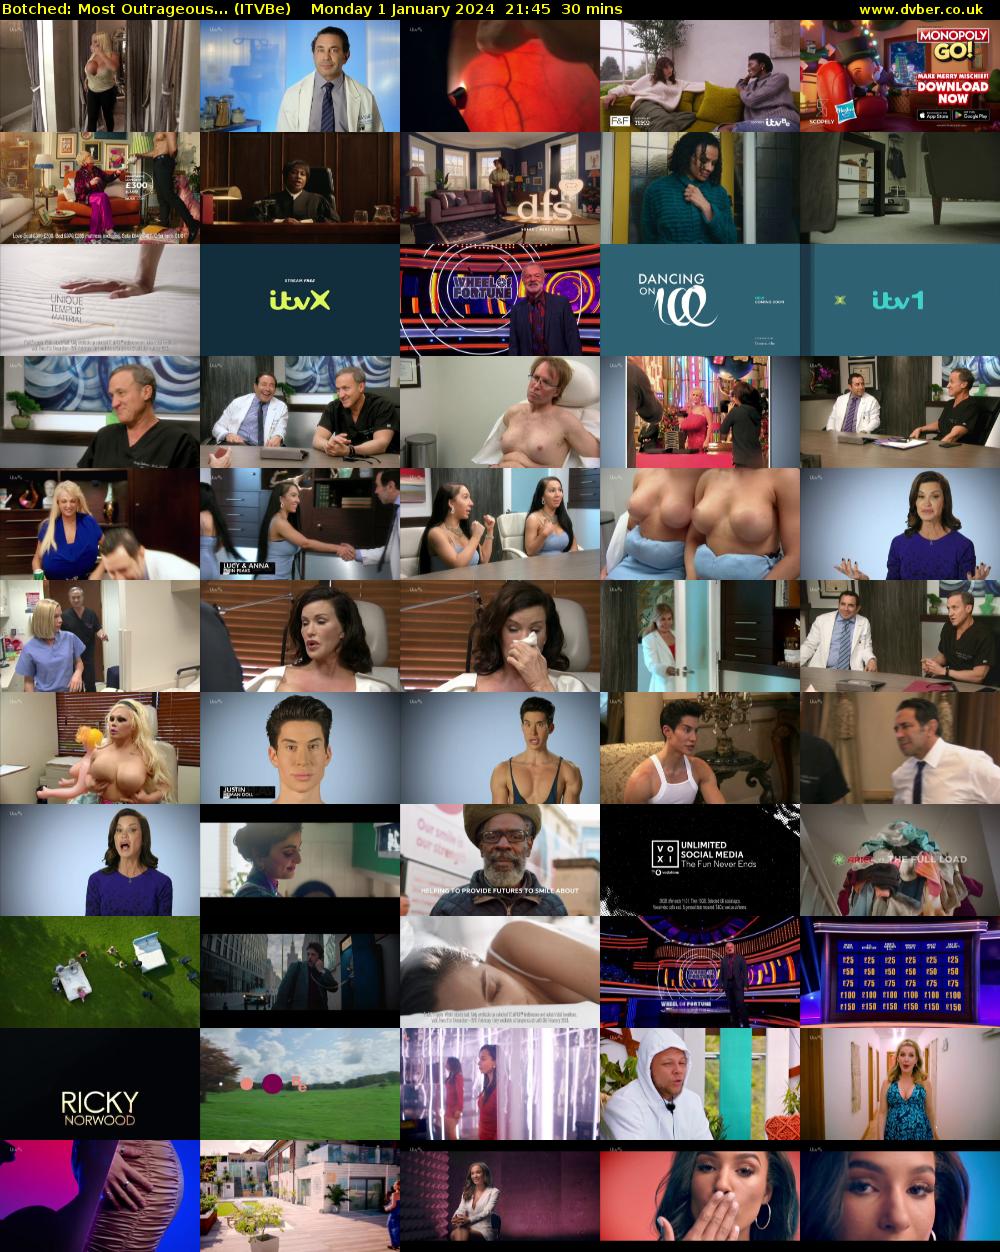 Botched: Most Outrageous... (ITVBe) Monday 1 January 2024 21:45 - 22:15